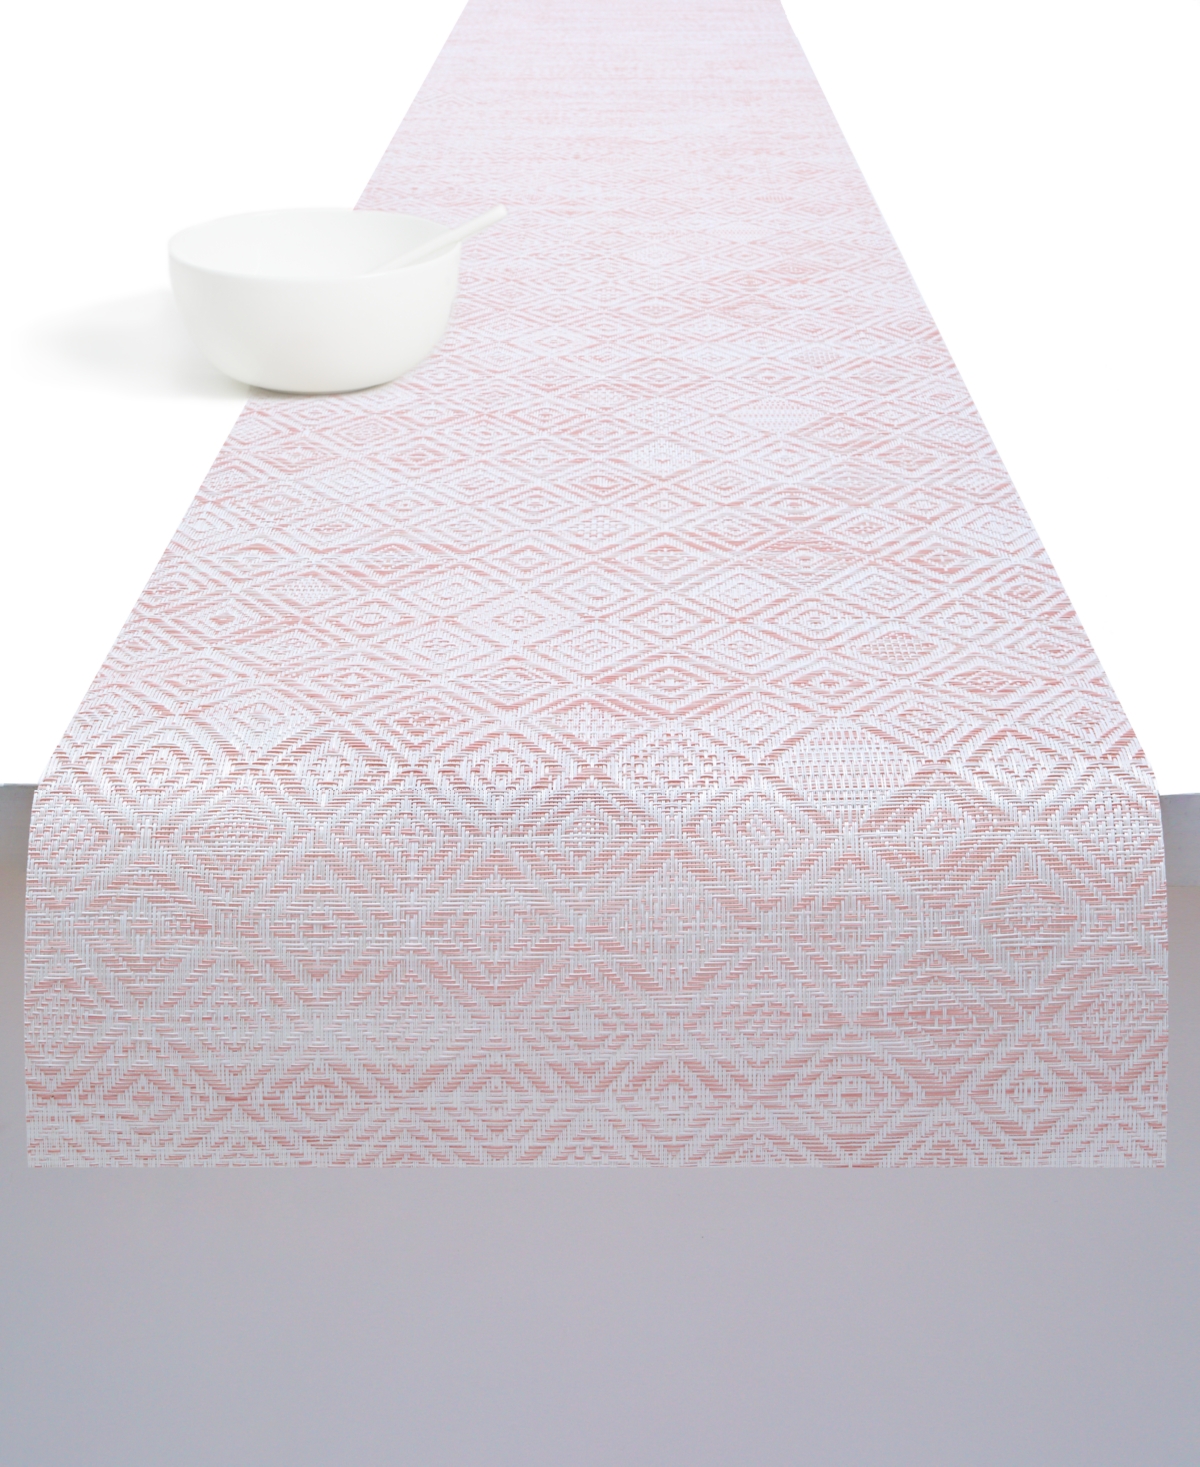 15795772 Chilewich Mosaic Table Runner sku 15795772